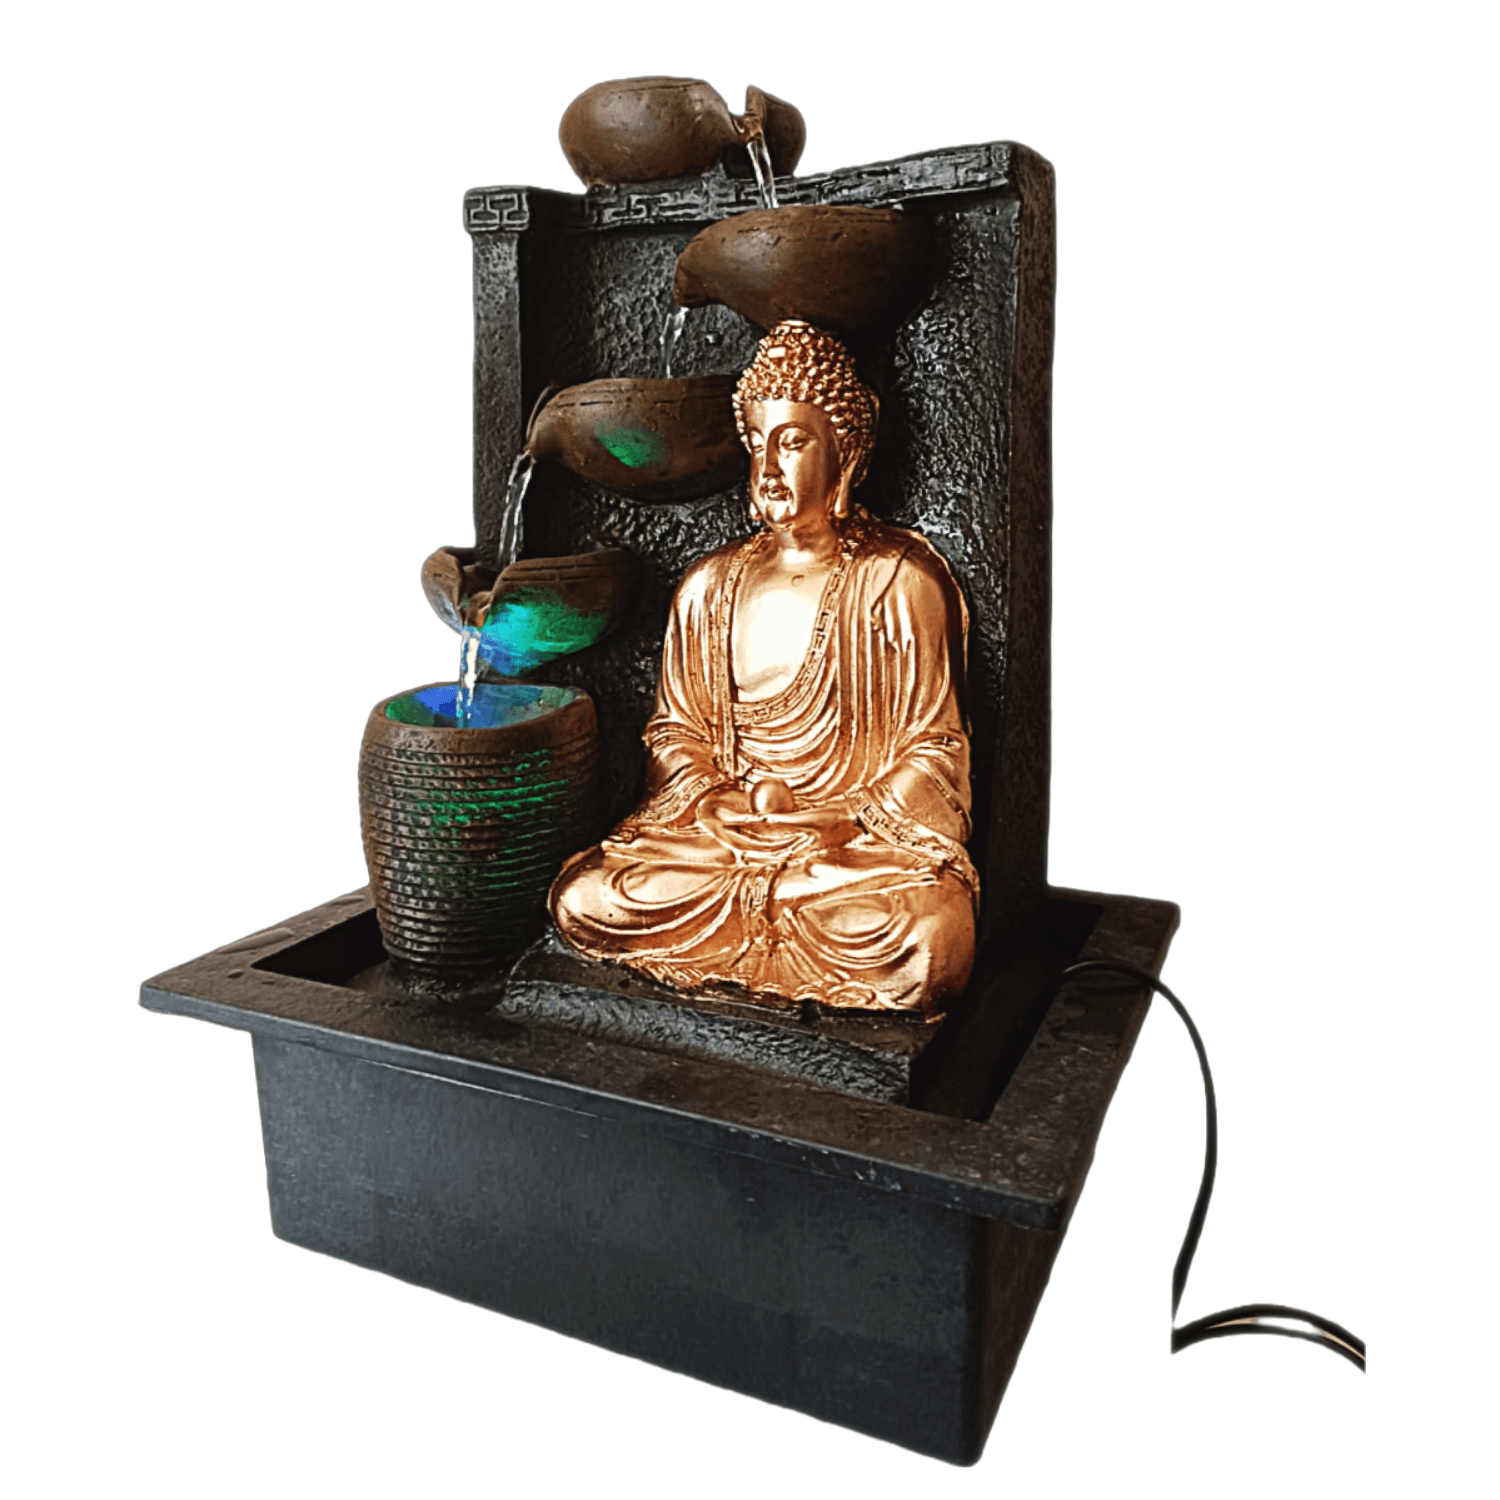 Water Fountain ALiLA Buddha Diya Statue Waterfall Fountain with LED Lights for Home/Living room/Garden/Table/ Decoration gifting item Water Fountain